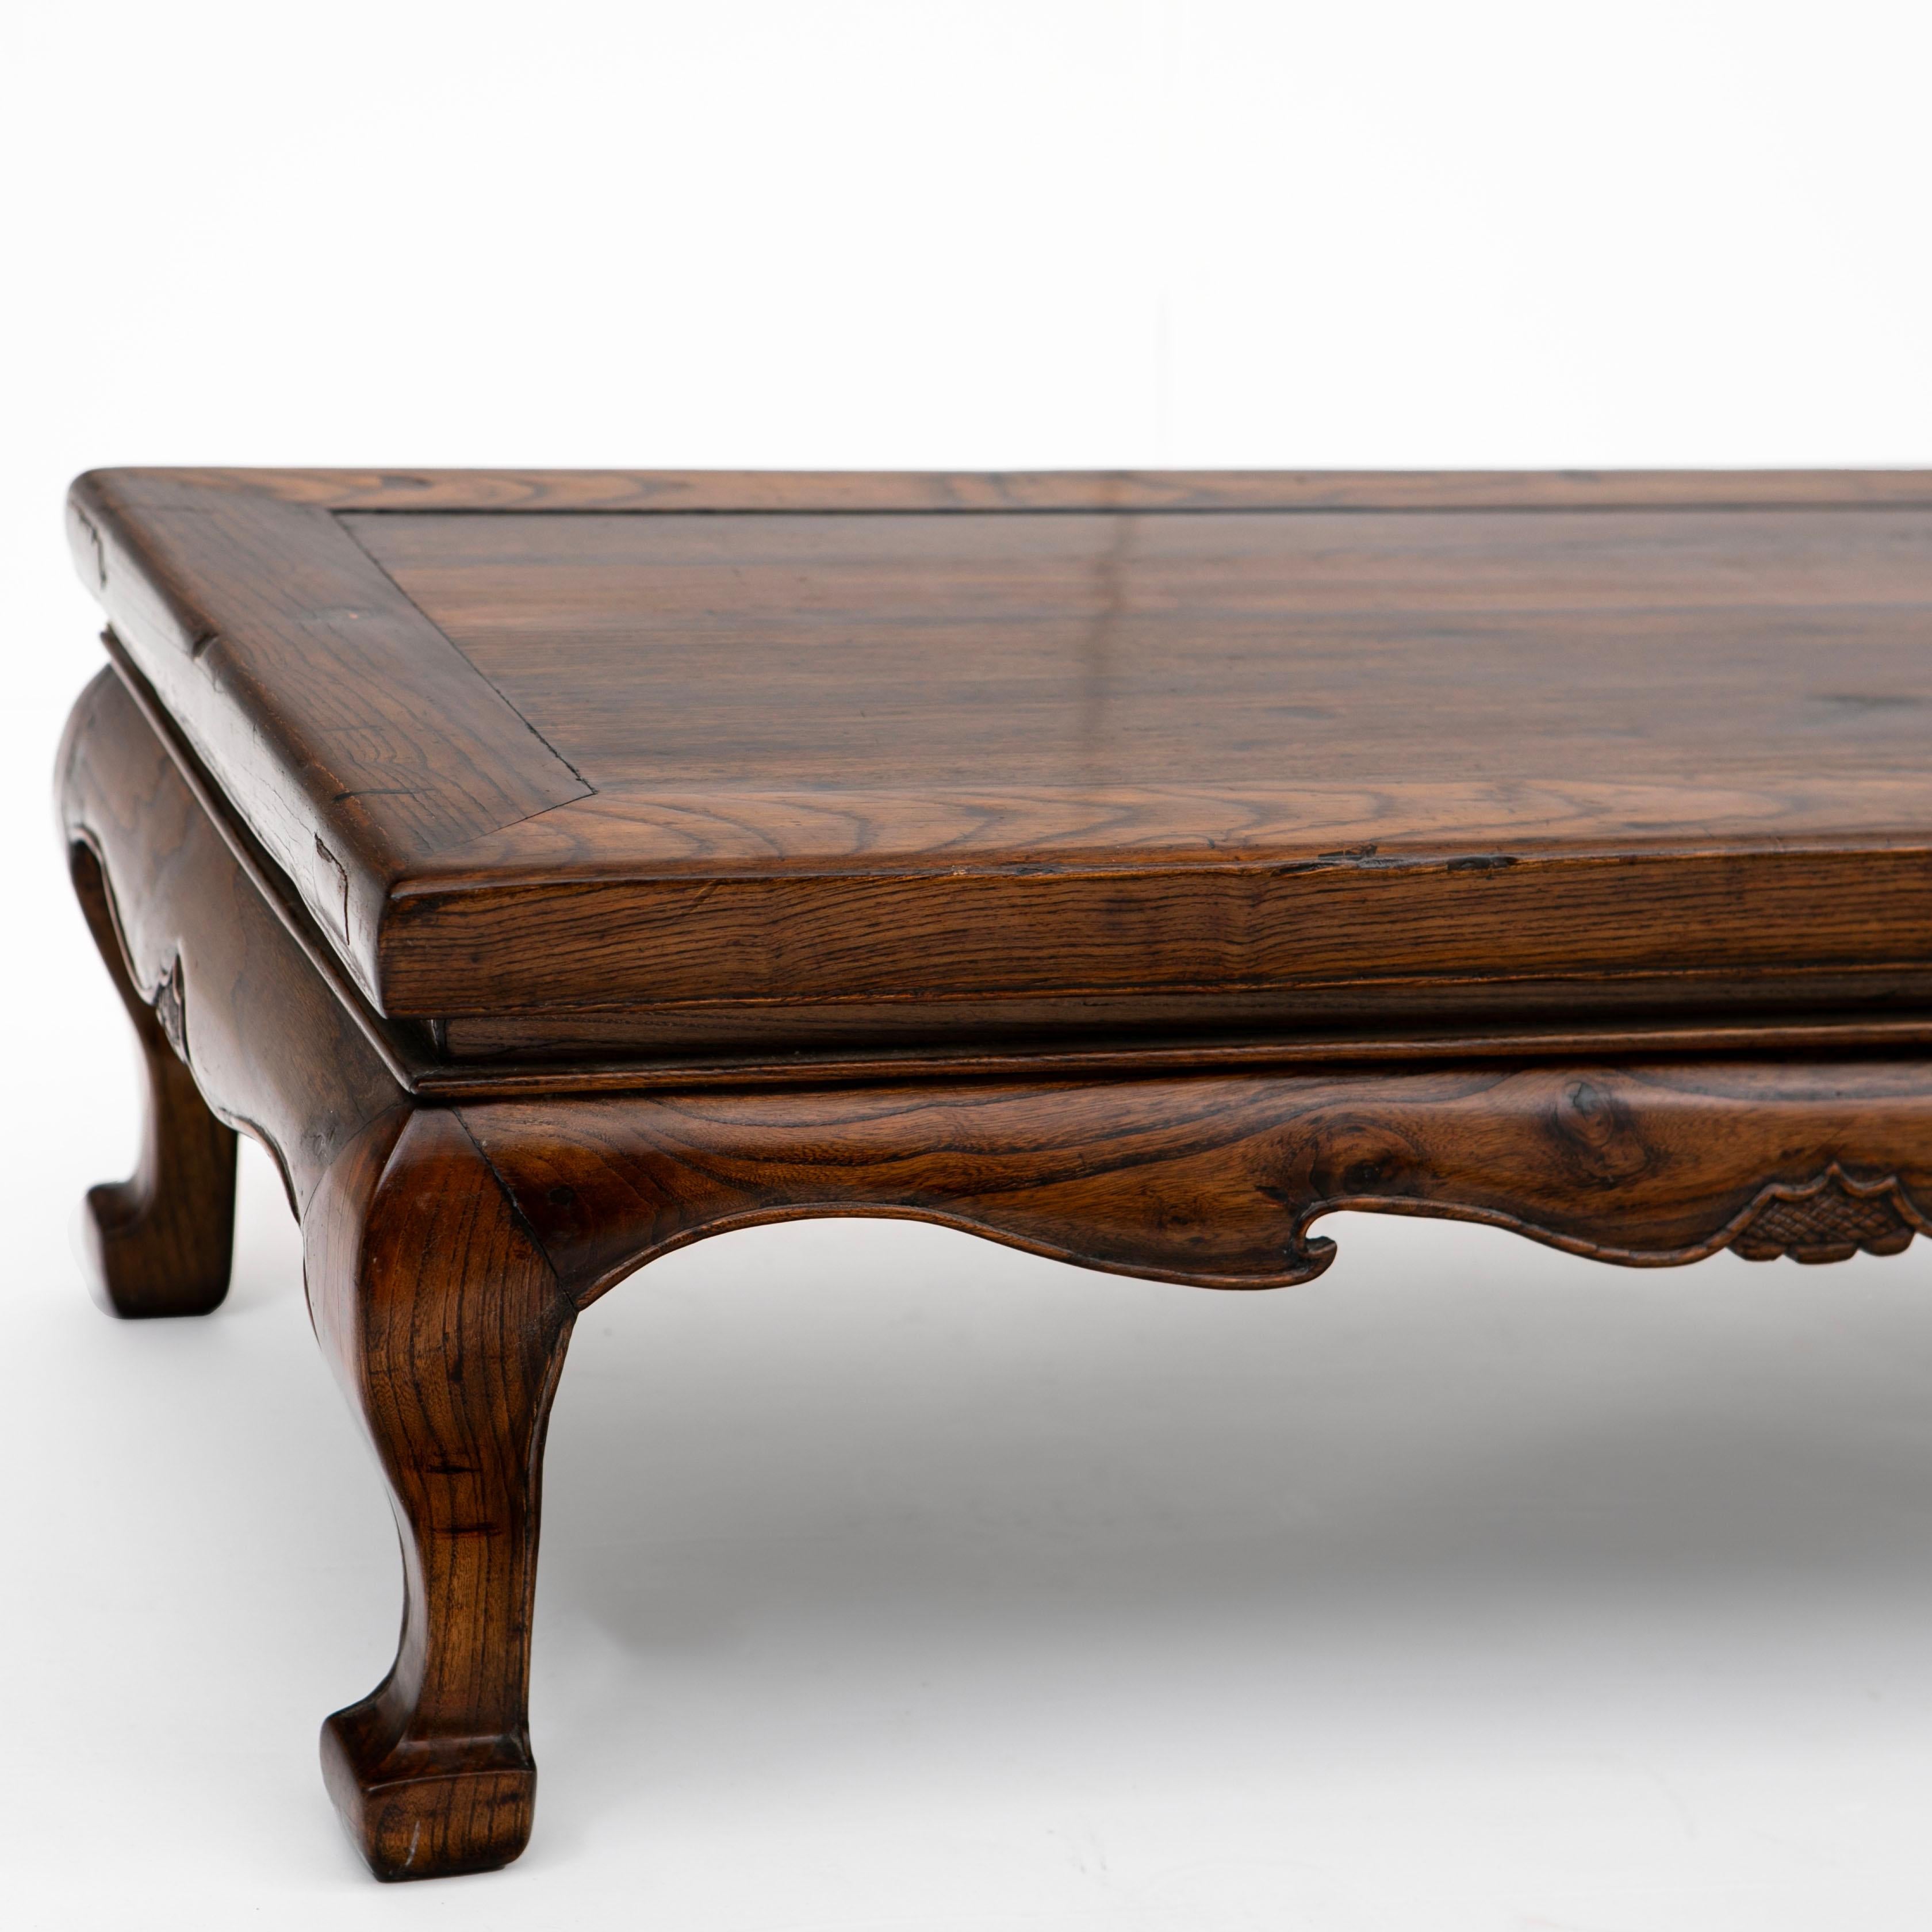 Chinese Mid 19th Century Qing Dynasty Kang Table For Sale 1